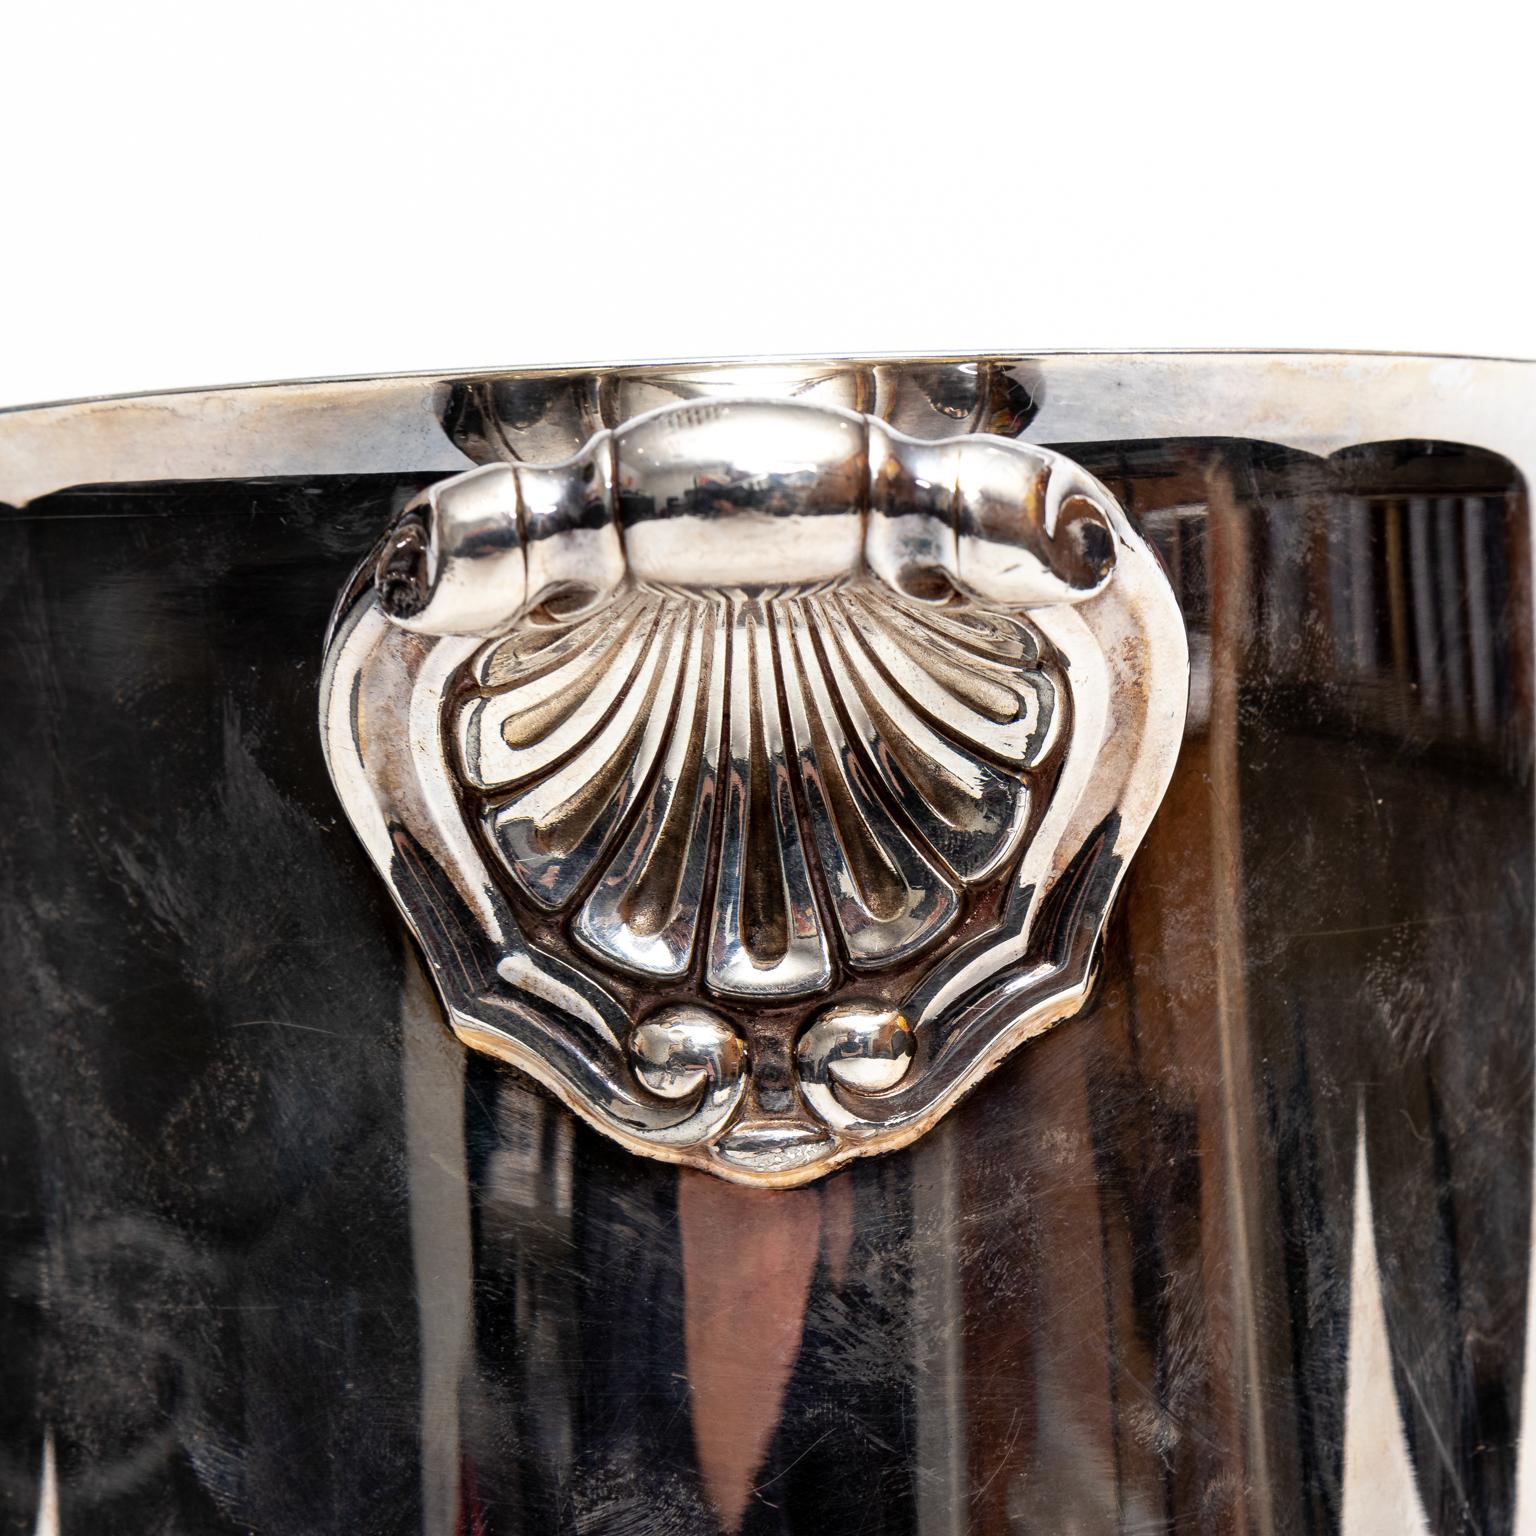 A vintage Christofle silver plate wine cooler/ice bucket. Beautiful lines on a footed base. Pattern is entitled “Ormesson” part of the Gallia collection. Made in France in the 1950s. Please note of wear consistent with age.